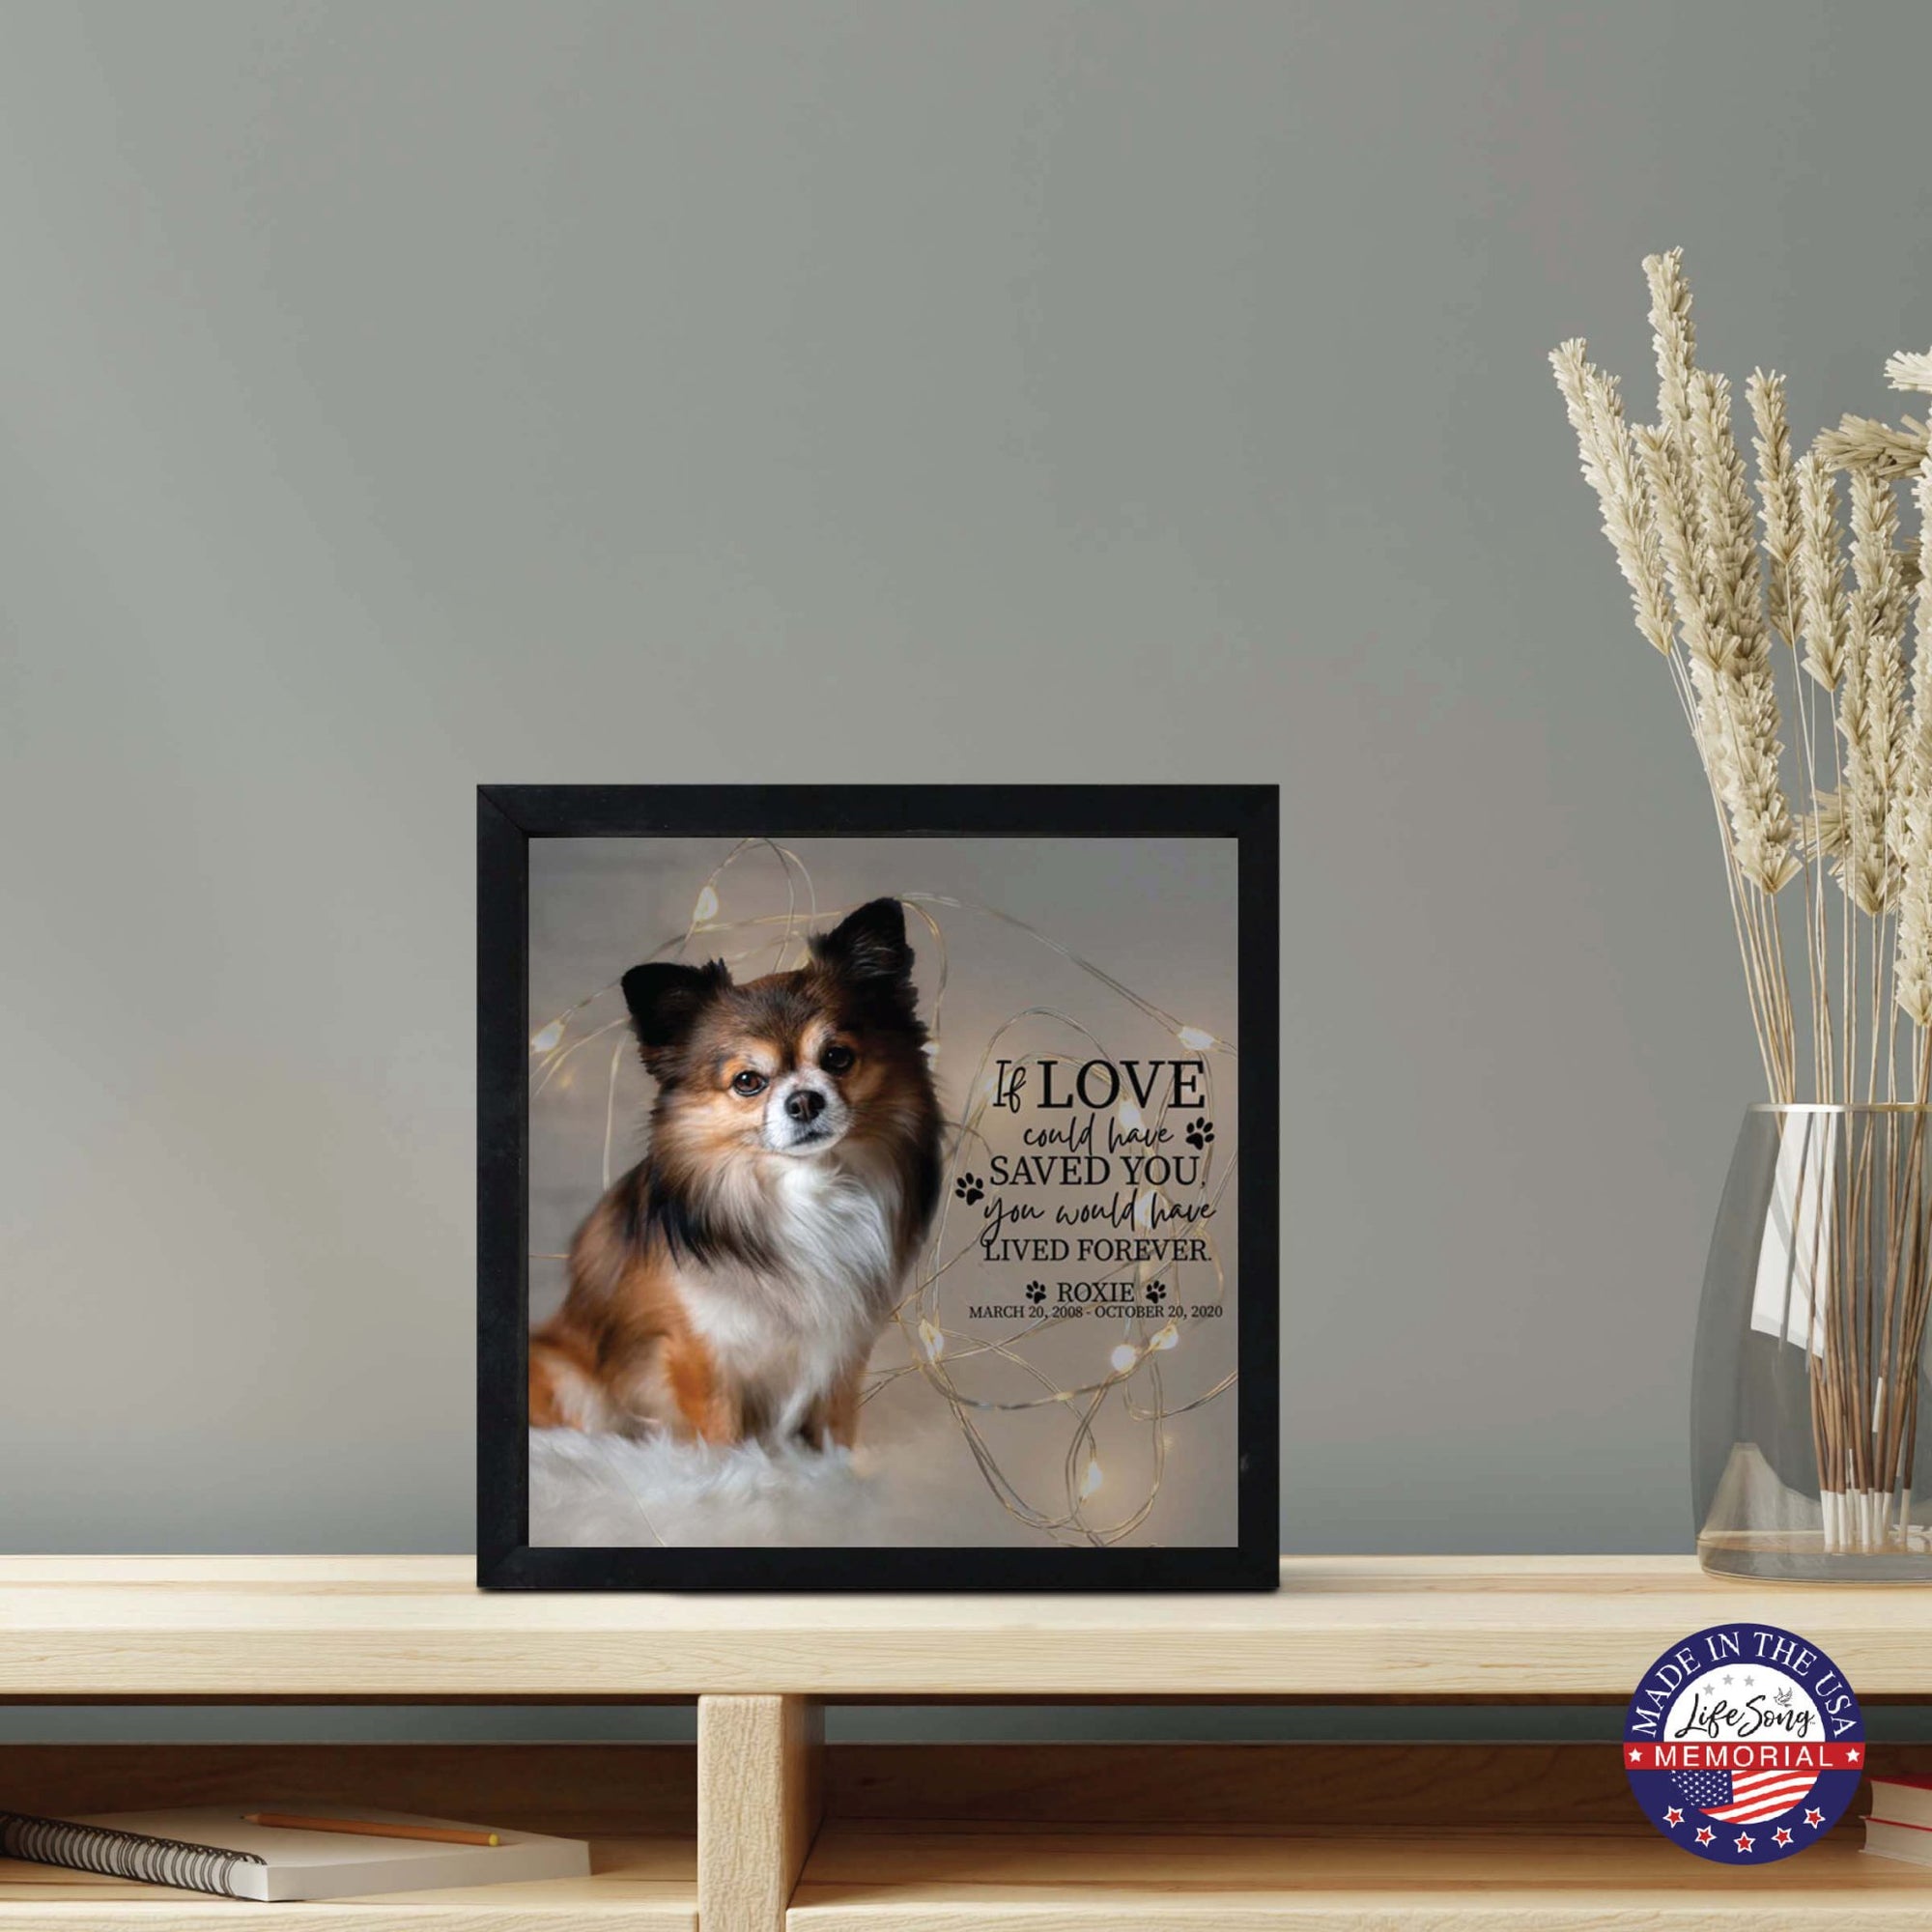 Custom Pet Memorial Framed Shadow Box Wall Décor for the Loss of Beloved Pet - If Love Could Have - LifeSong Milestones